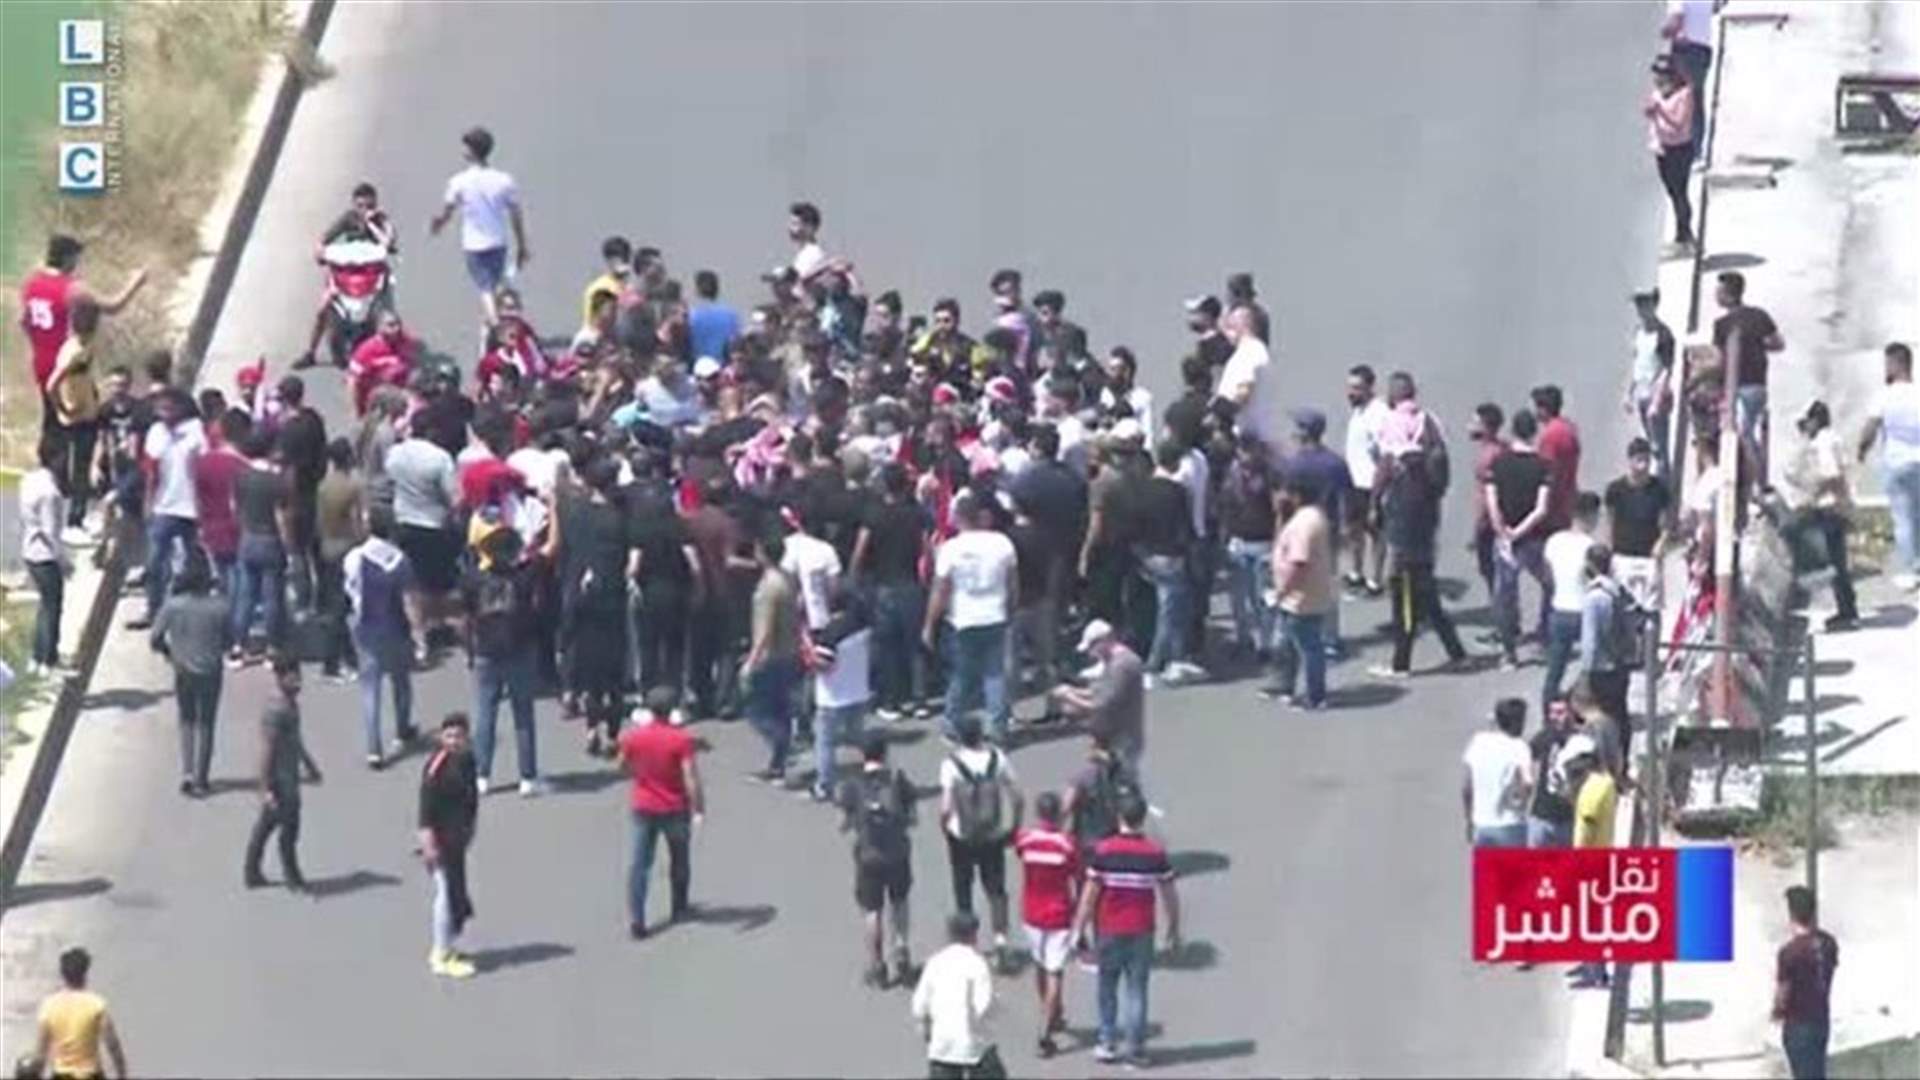 Tensions among protesters at Martyrs Square – [VIDEO]